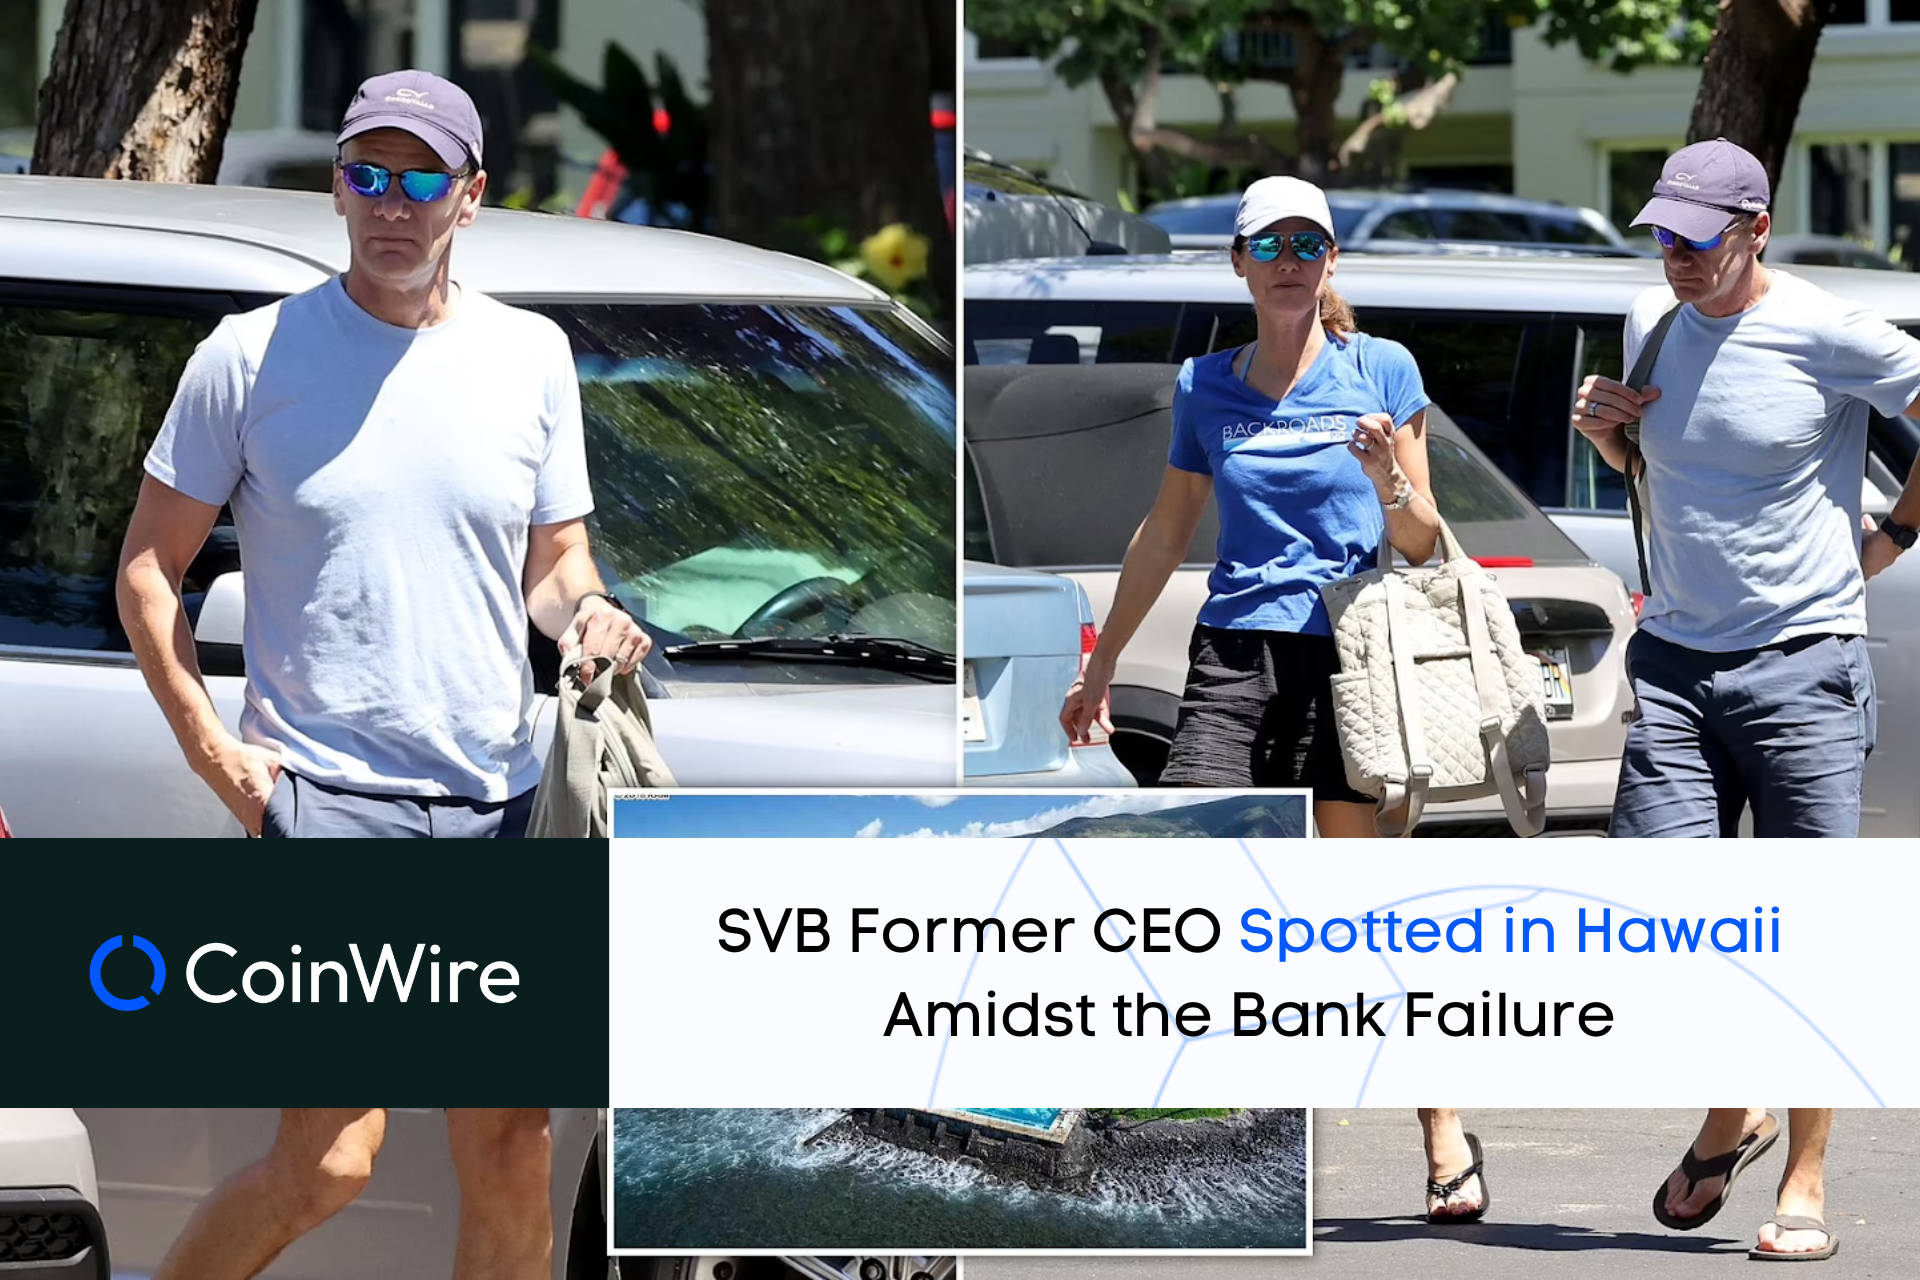 Svb Former Ceo Spotted In Hawaii Amidst The Bank Failure